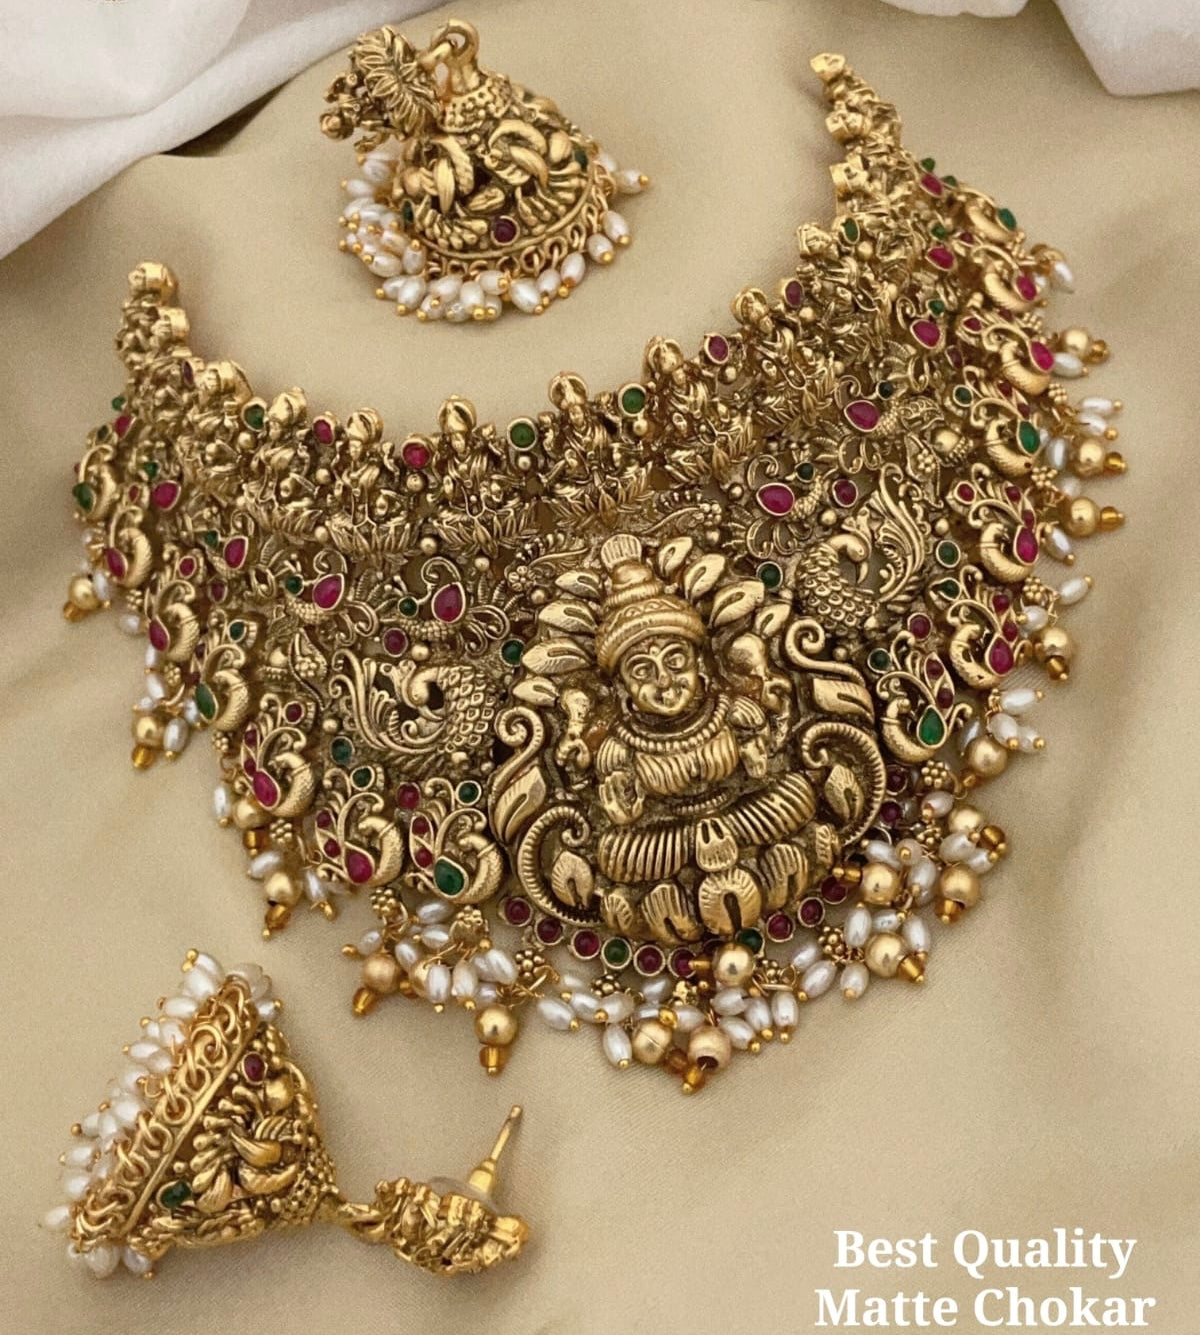 Bridal and Partywear Lakshmi Choker Necklace set- Temple Jewelry Choker with Rice Beads